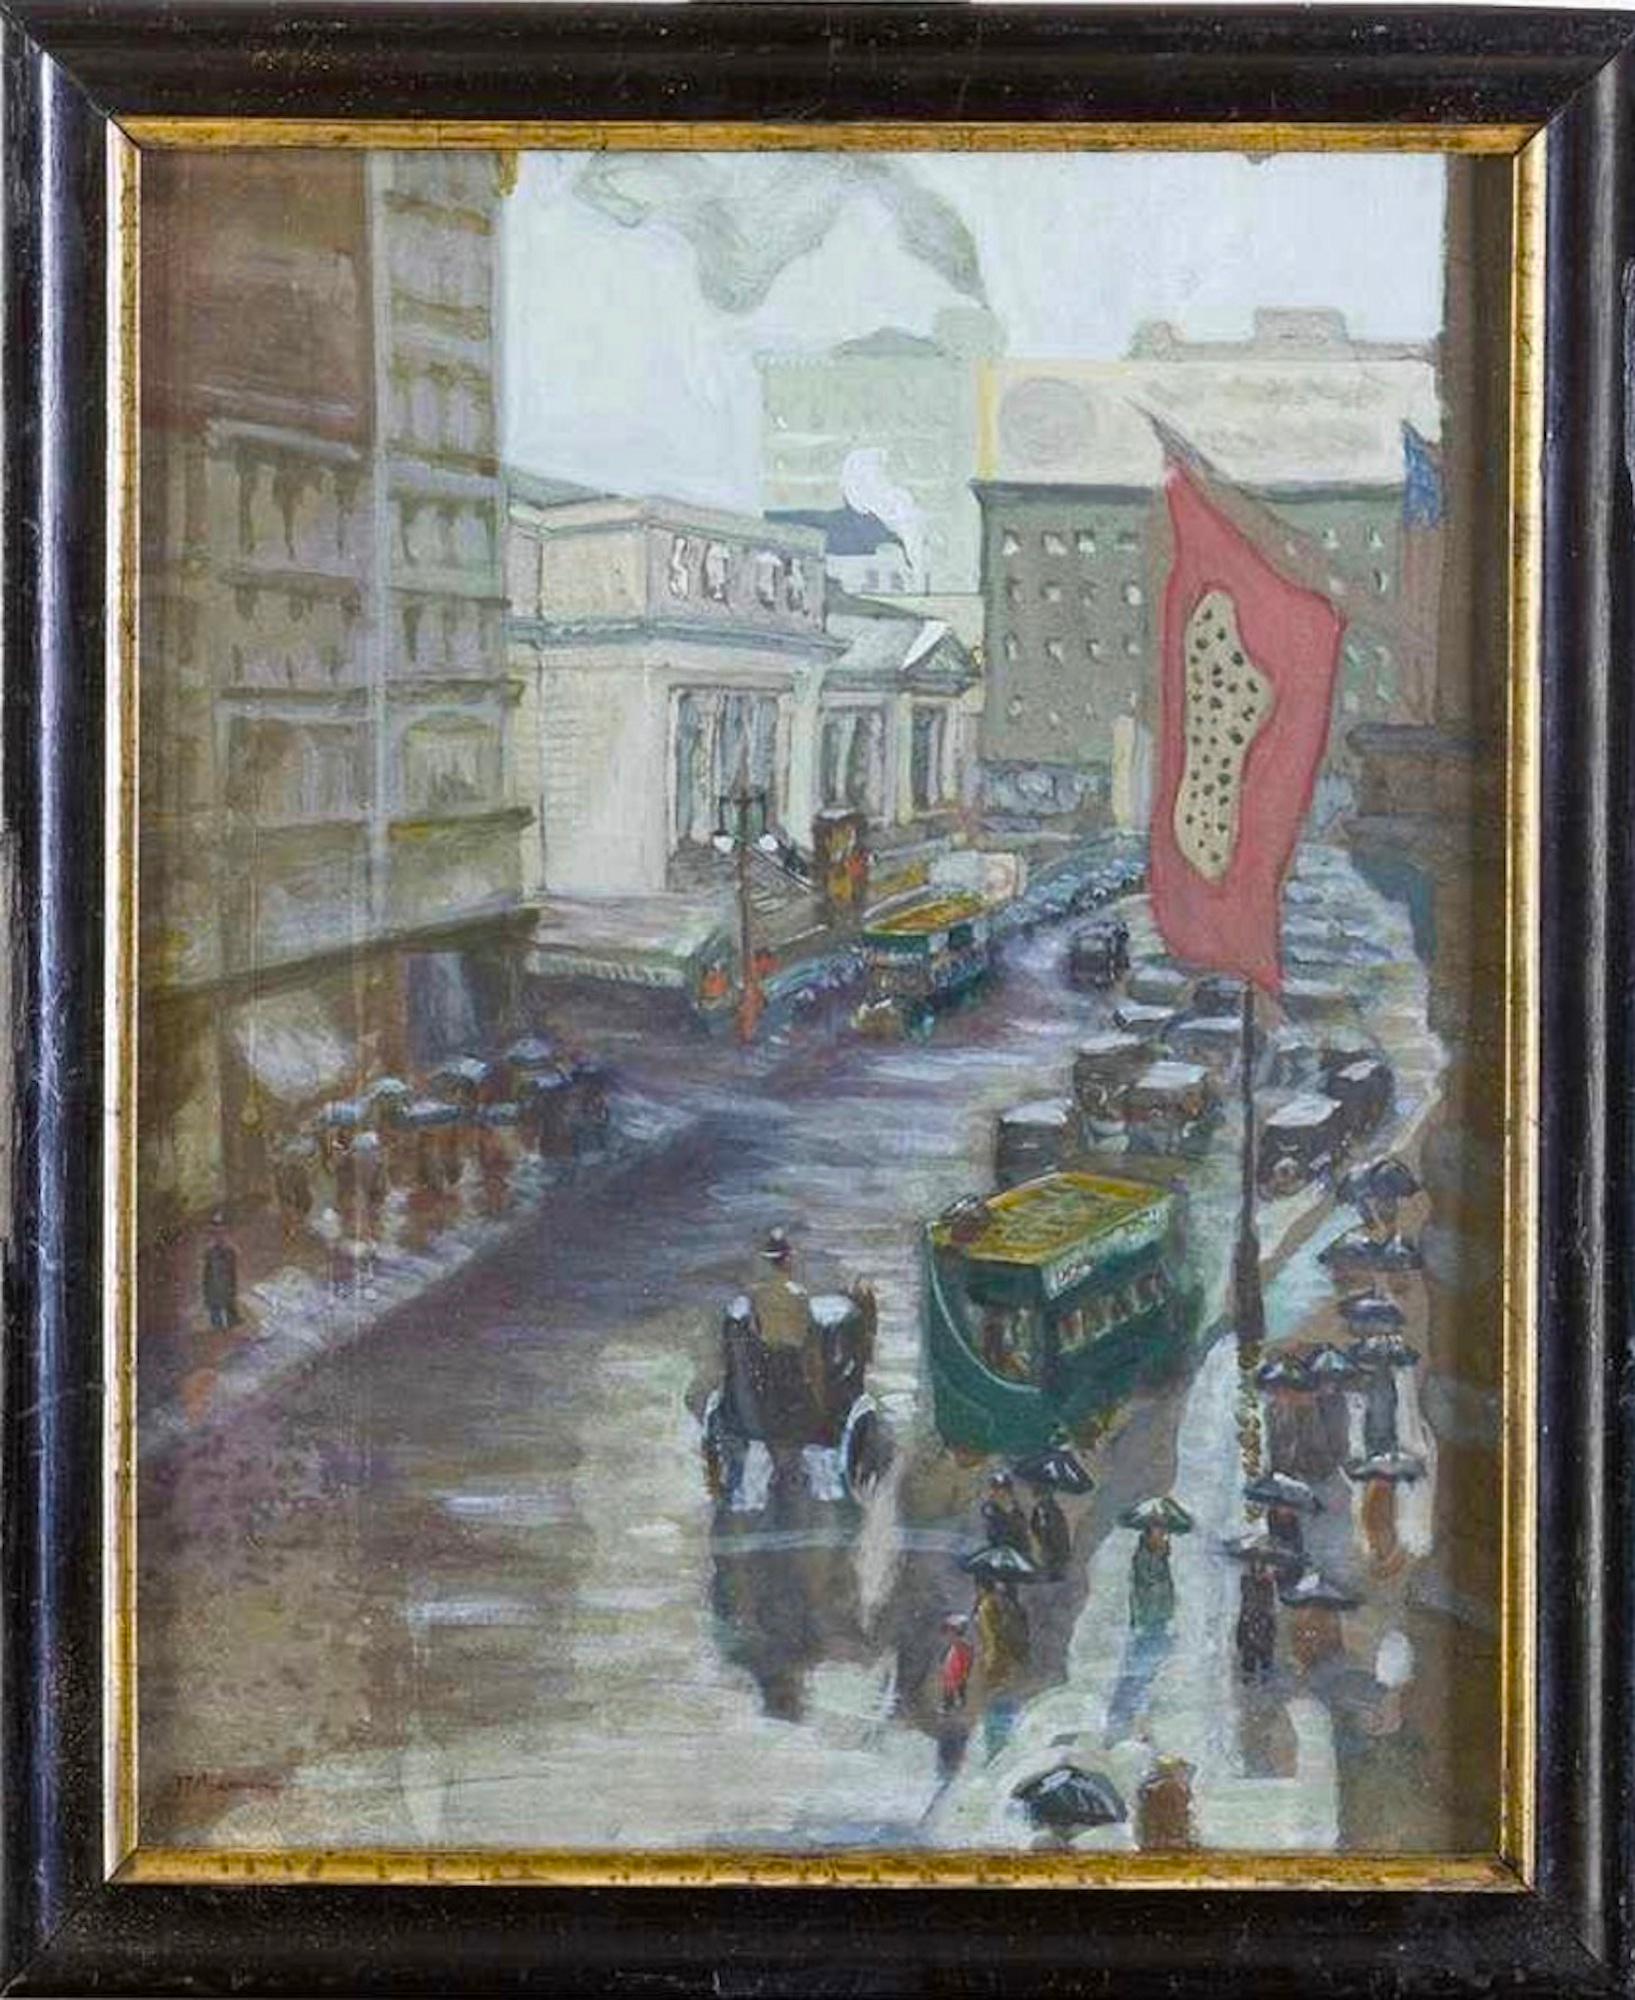 New York - Early 20th Century Fifth Avenue - Original Watercolor Early 1900